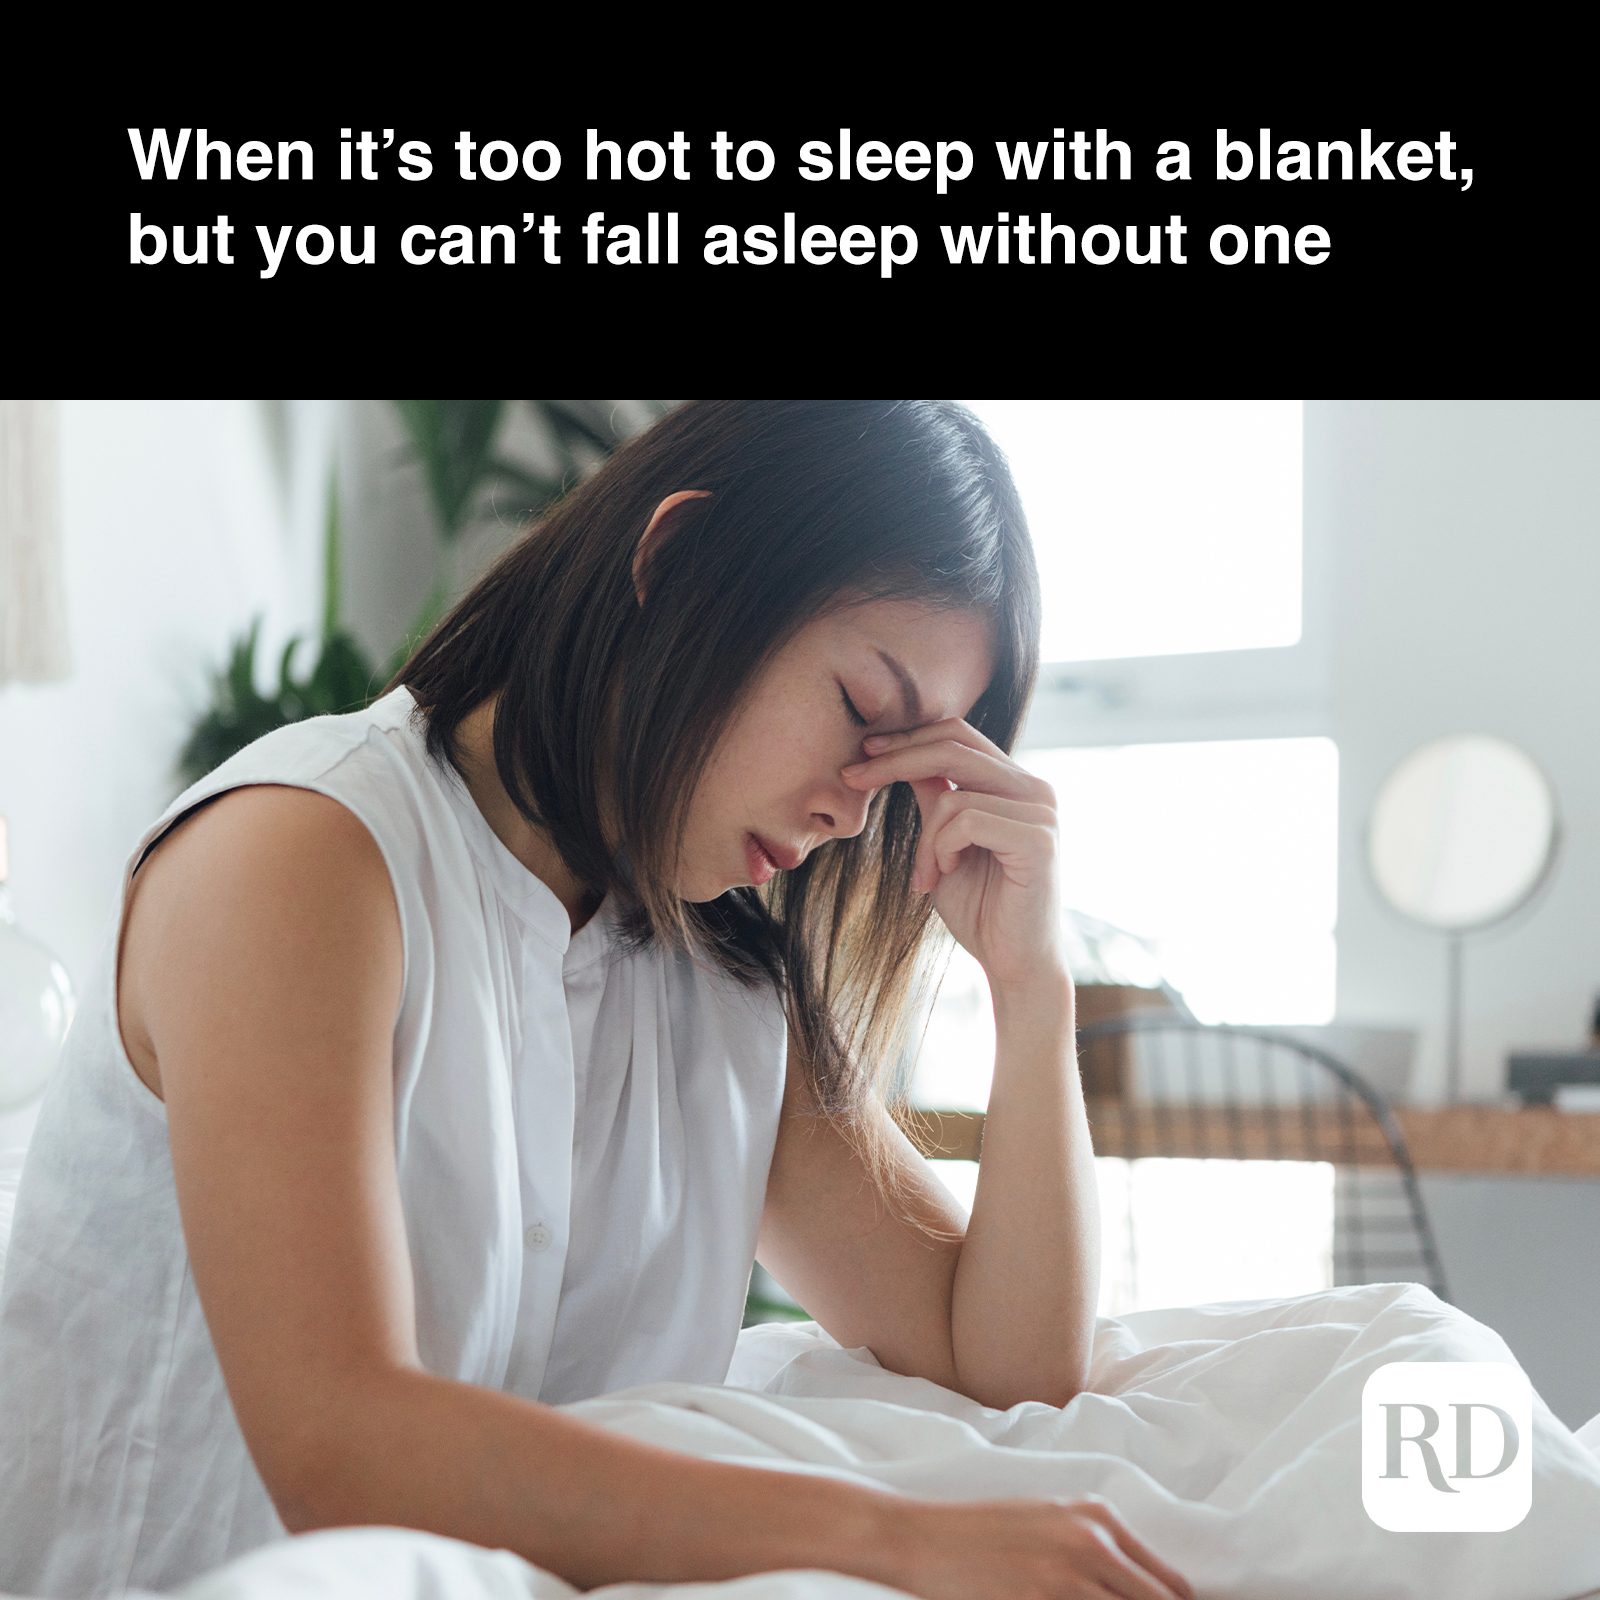 Woman holding head in bed MEME TEXT: When it's too hot to sleep with a blanket but you can't fall asleep without one